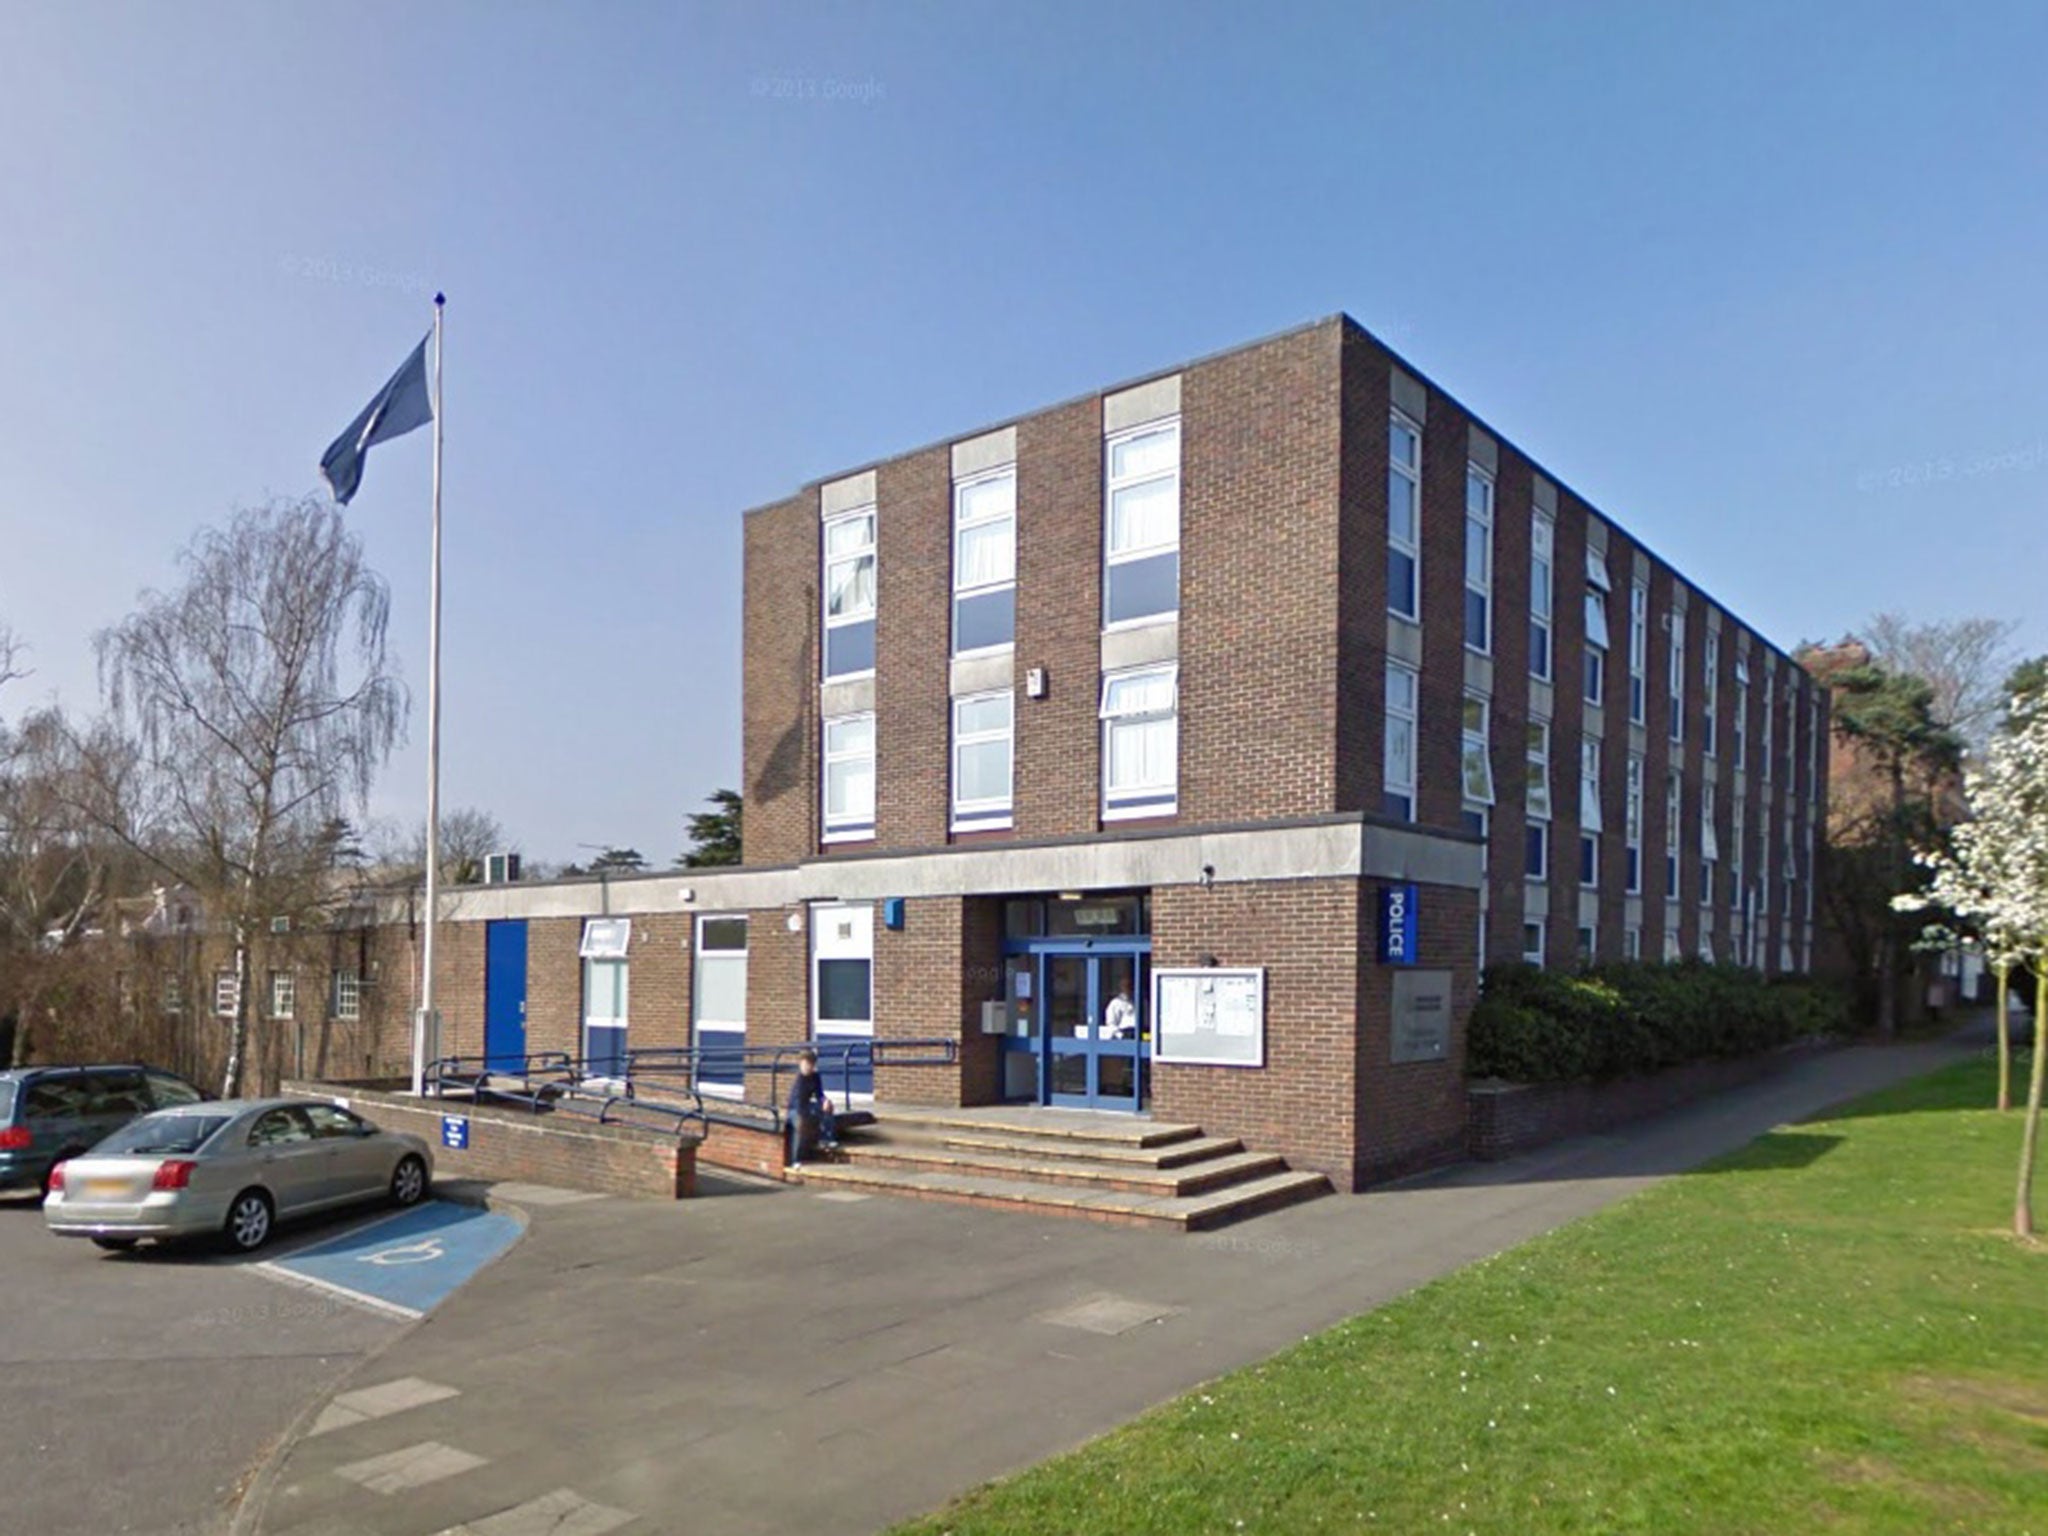 Hoddesdon Police Station in Hertfordshire has been evacuated